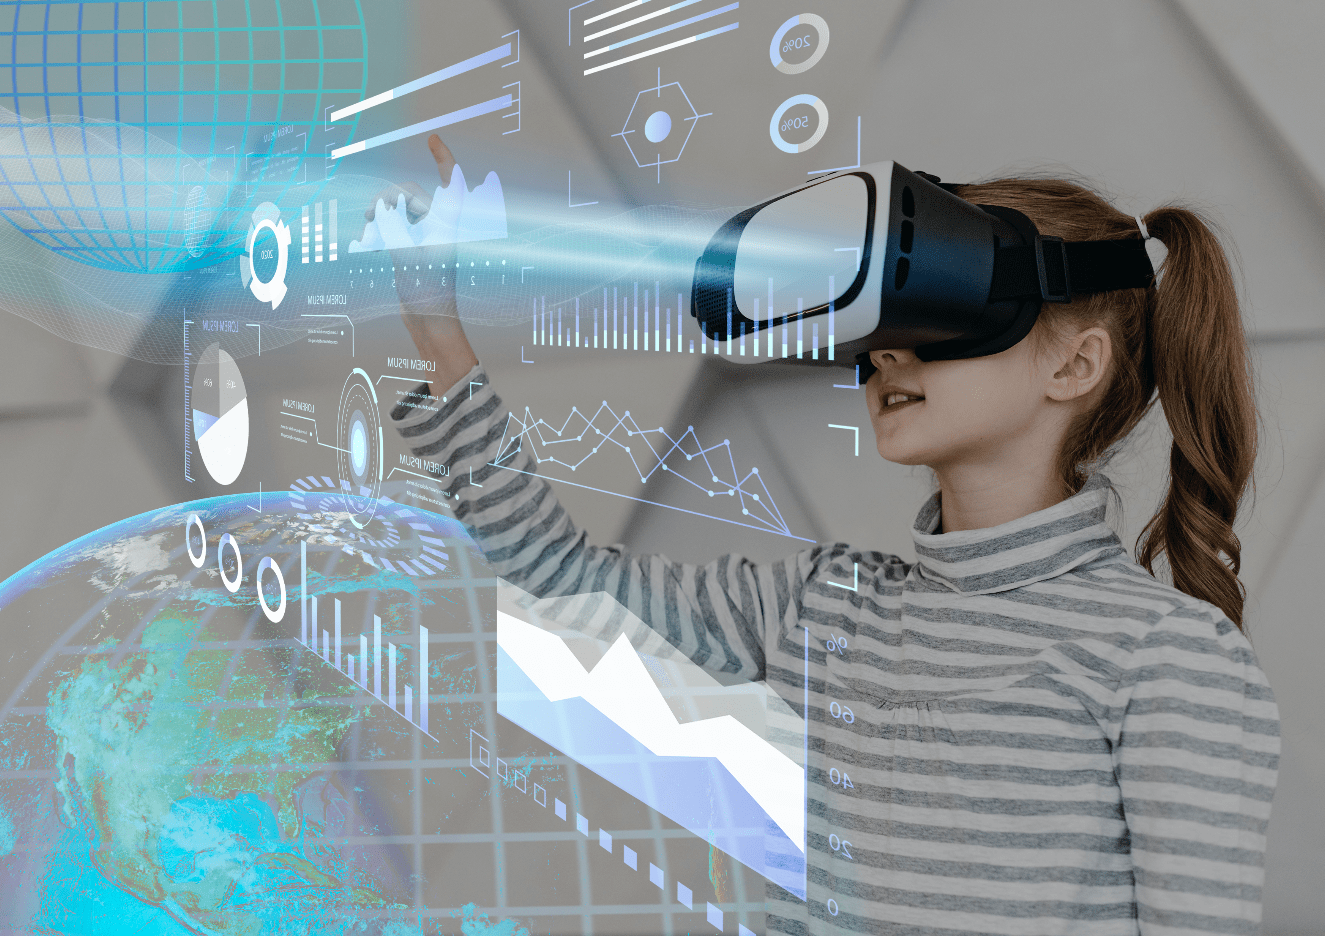     Using Augmented and Virtual Reality Technologies